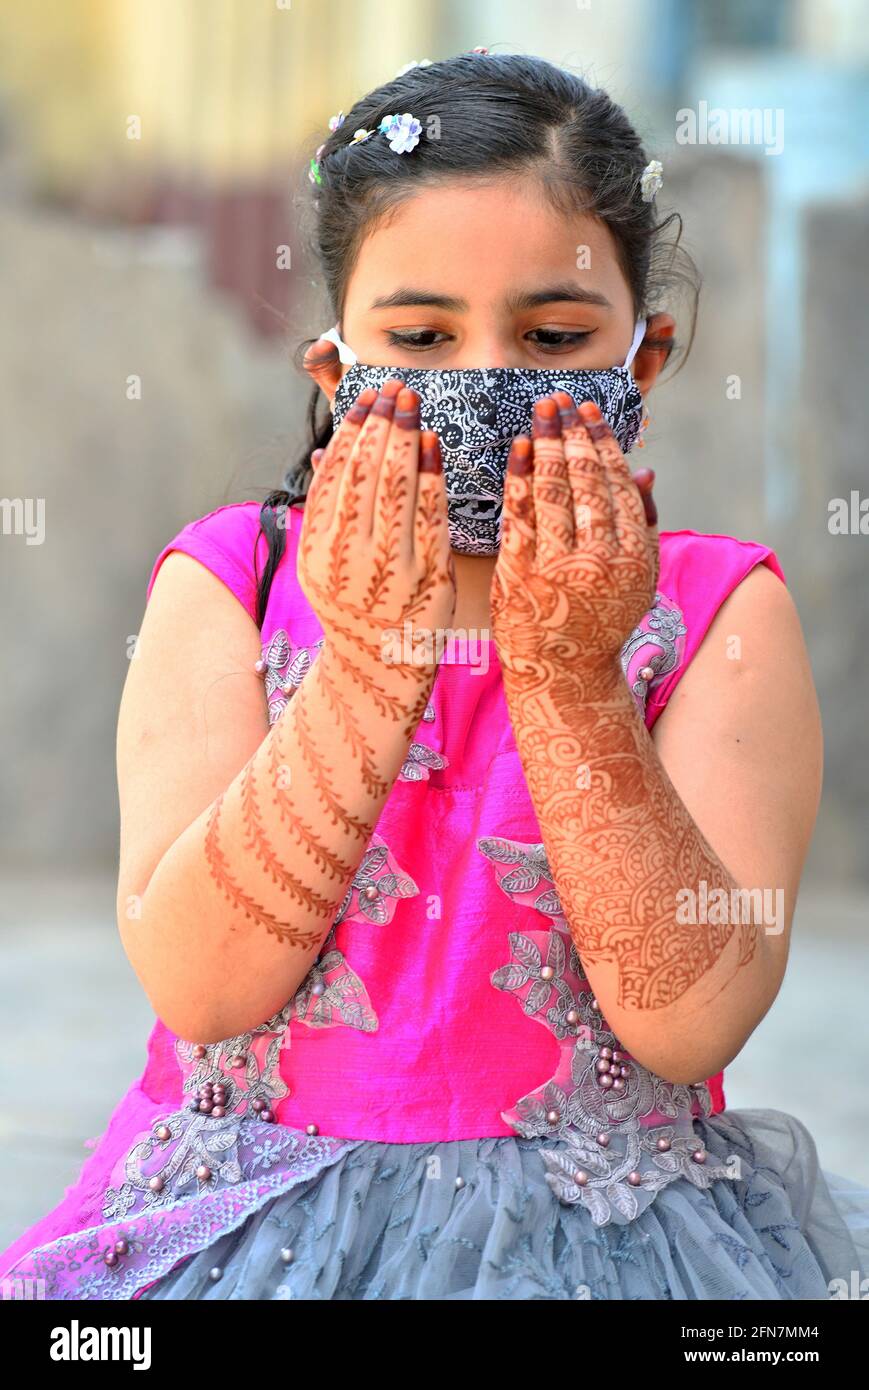 Beawar, Rajasthan, India, May 14, 2021: Muslim Girl offer namaz on the occasion of Eid-ul-Fitr, marking the end of fasting month of Ramadan, during ongoing COVID-induced lockdown in Beawar. Credit: Sumit Saraswat/Alamy Live News Stock Photo